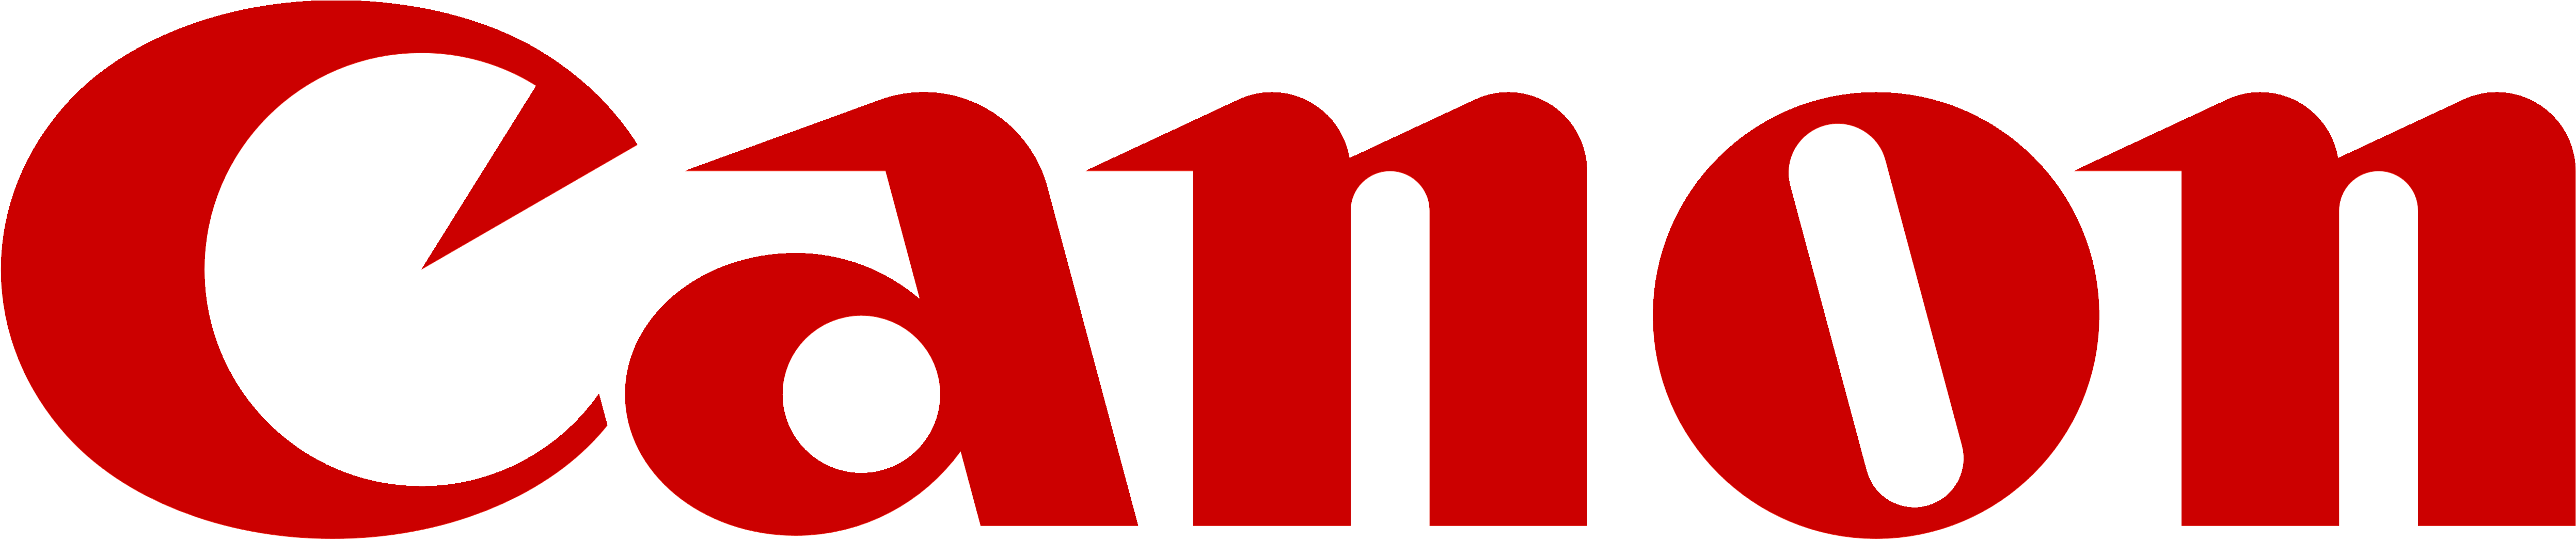 Canon Logo PNG